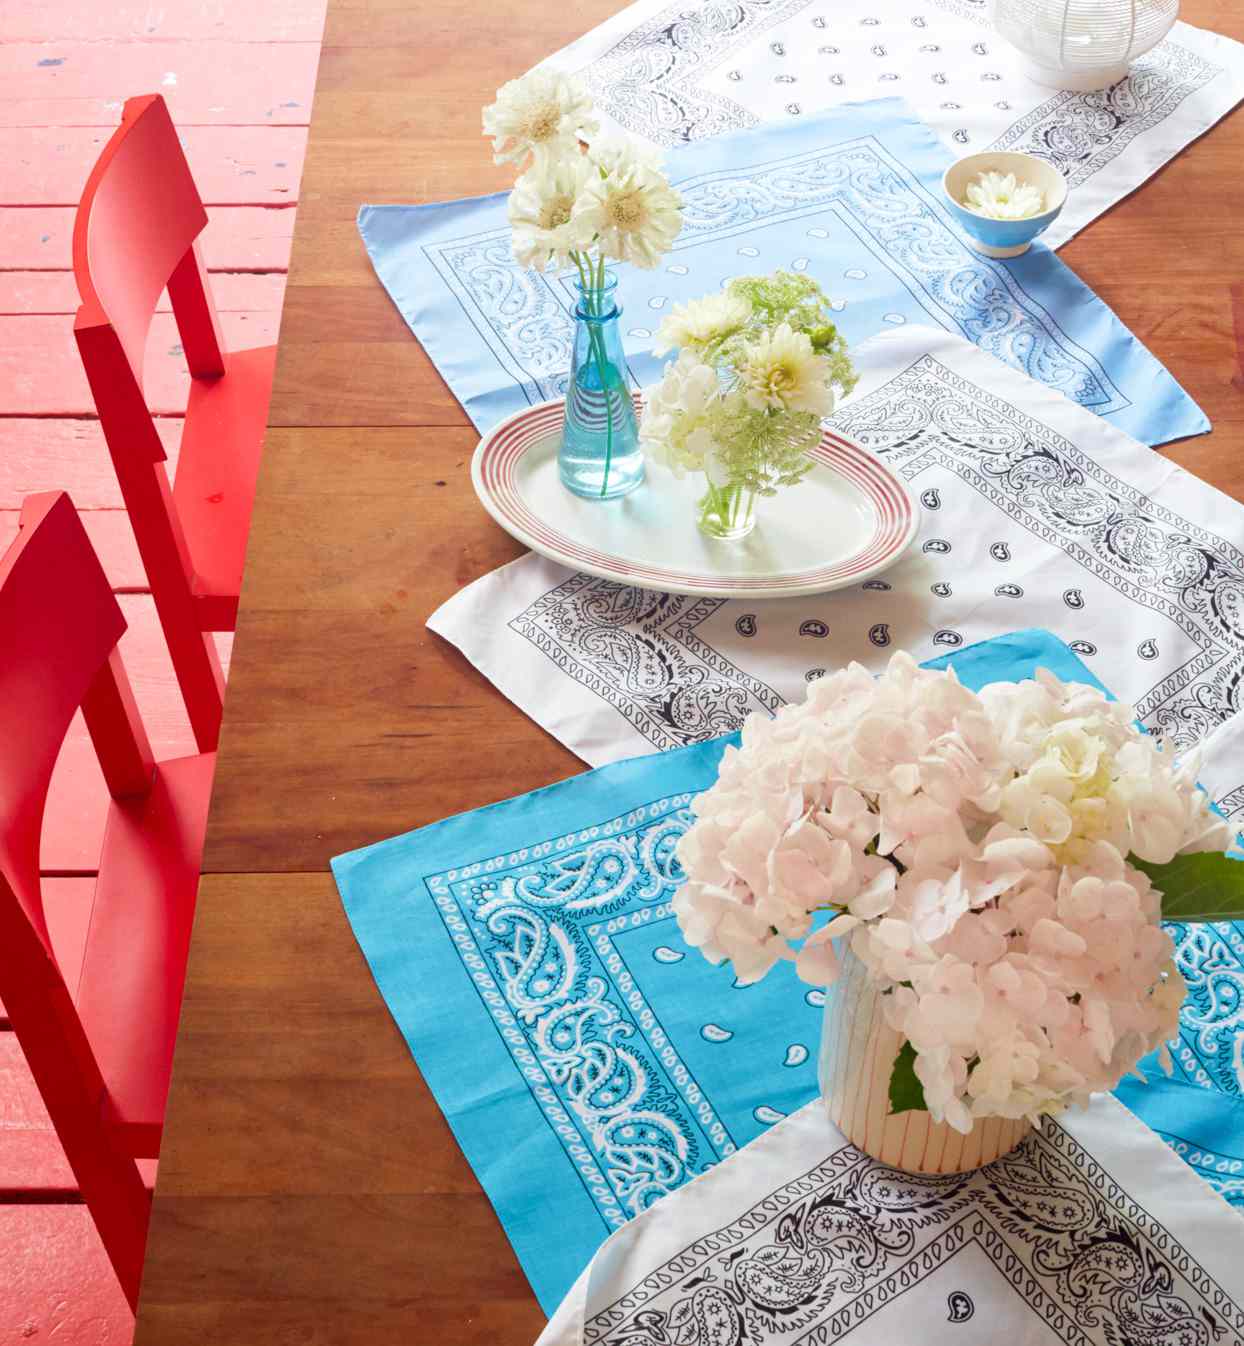 bandanas on table with flowers